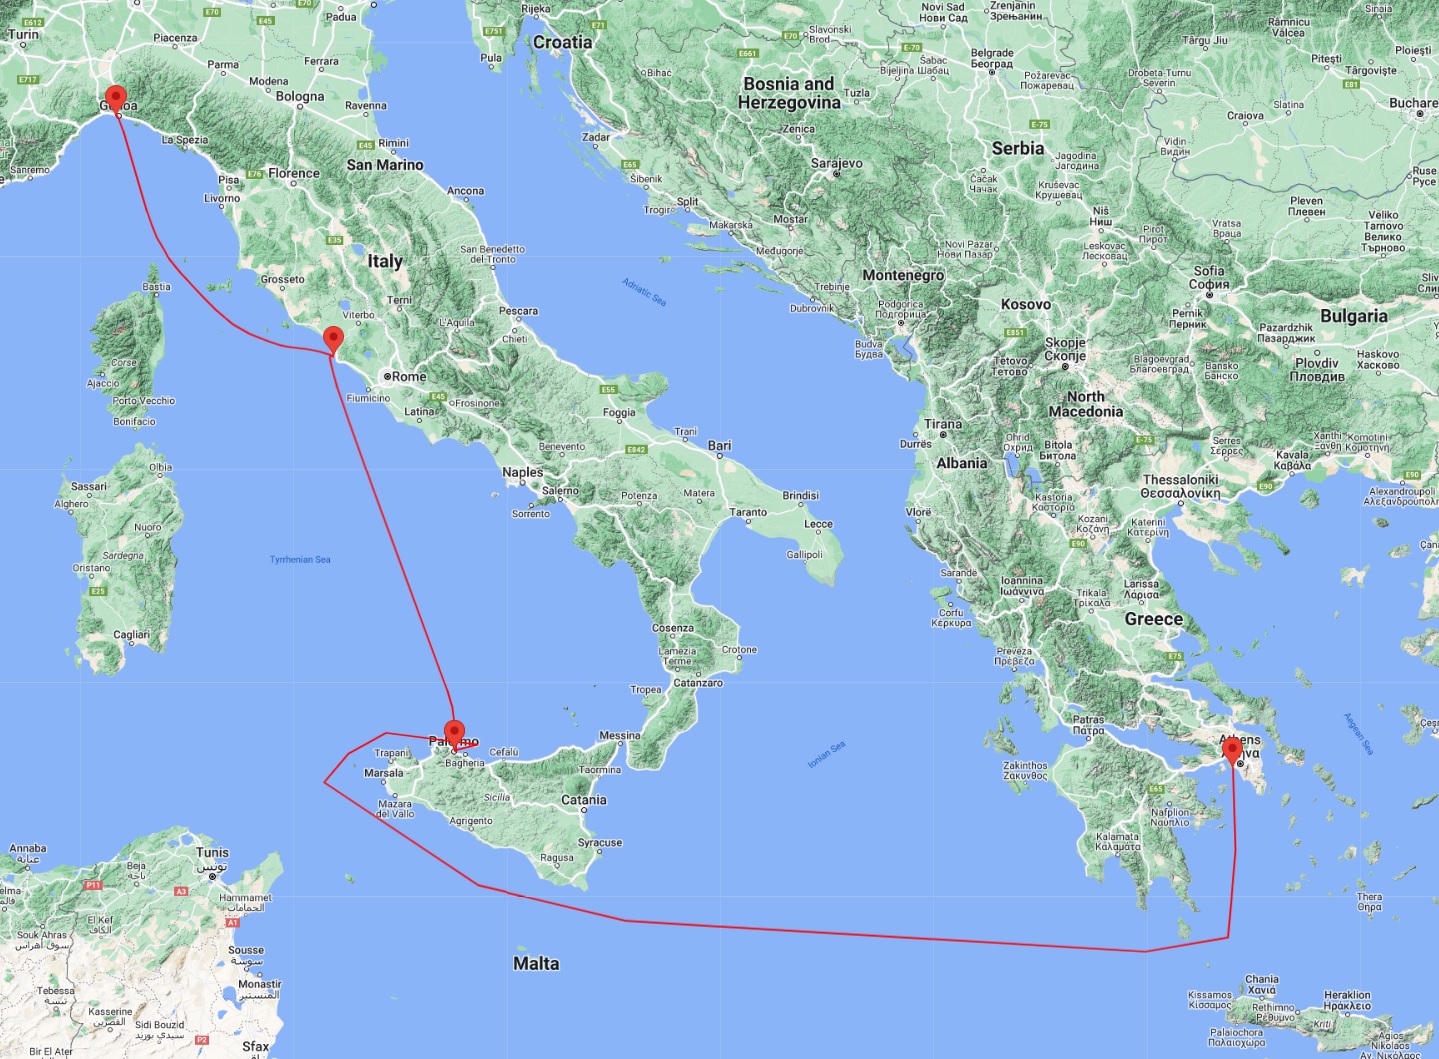 Western Mediterranean cruise from Athens to Genoa